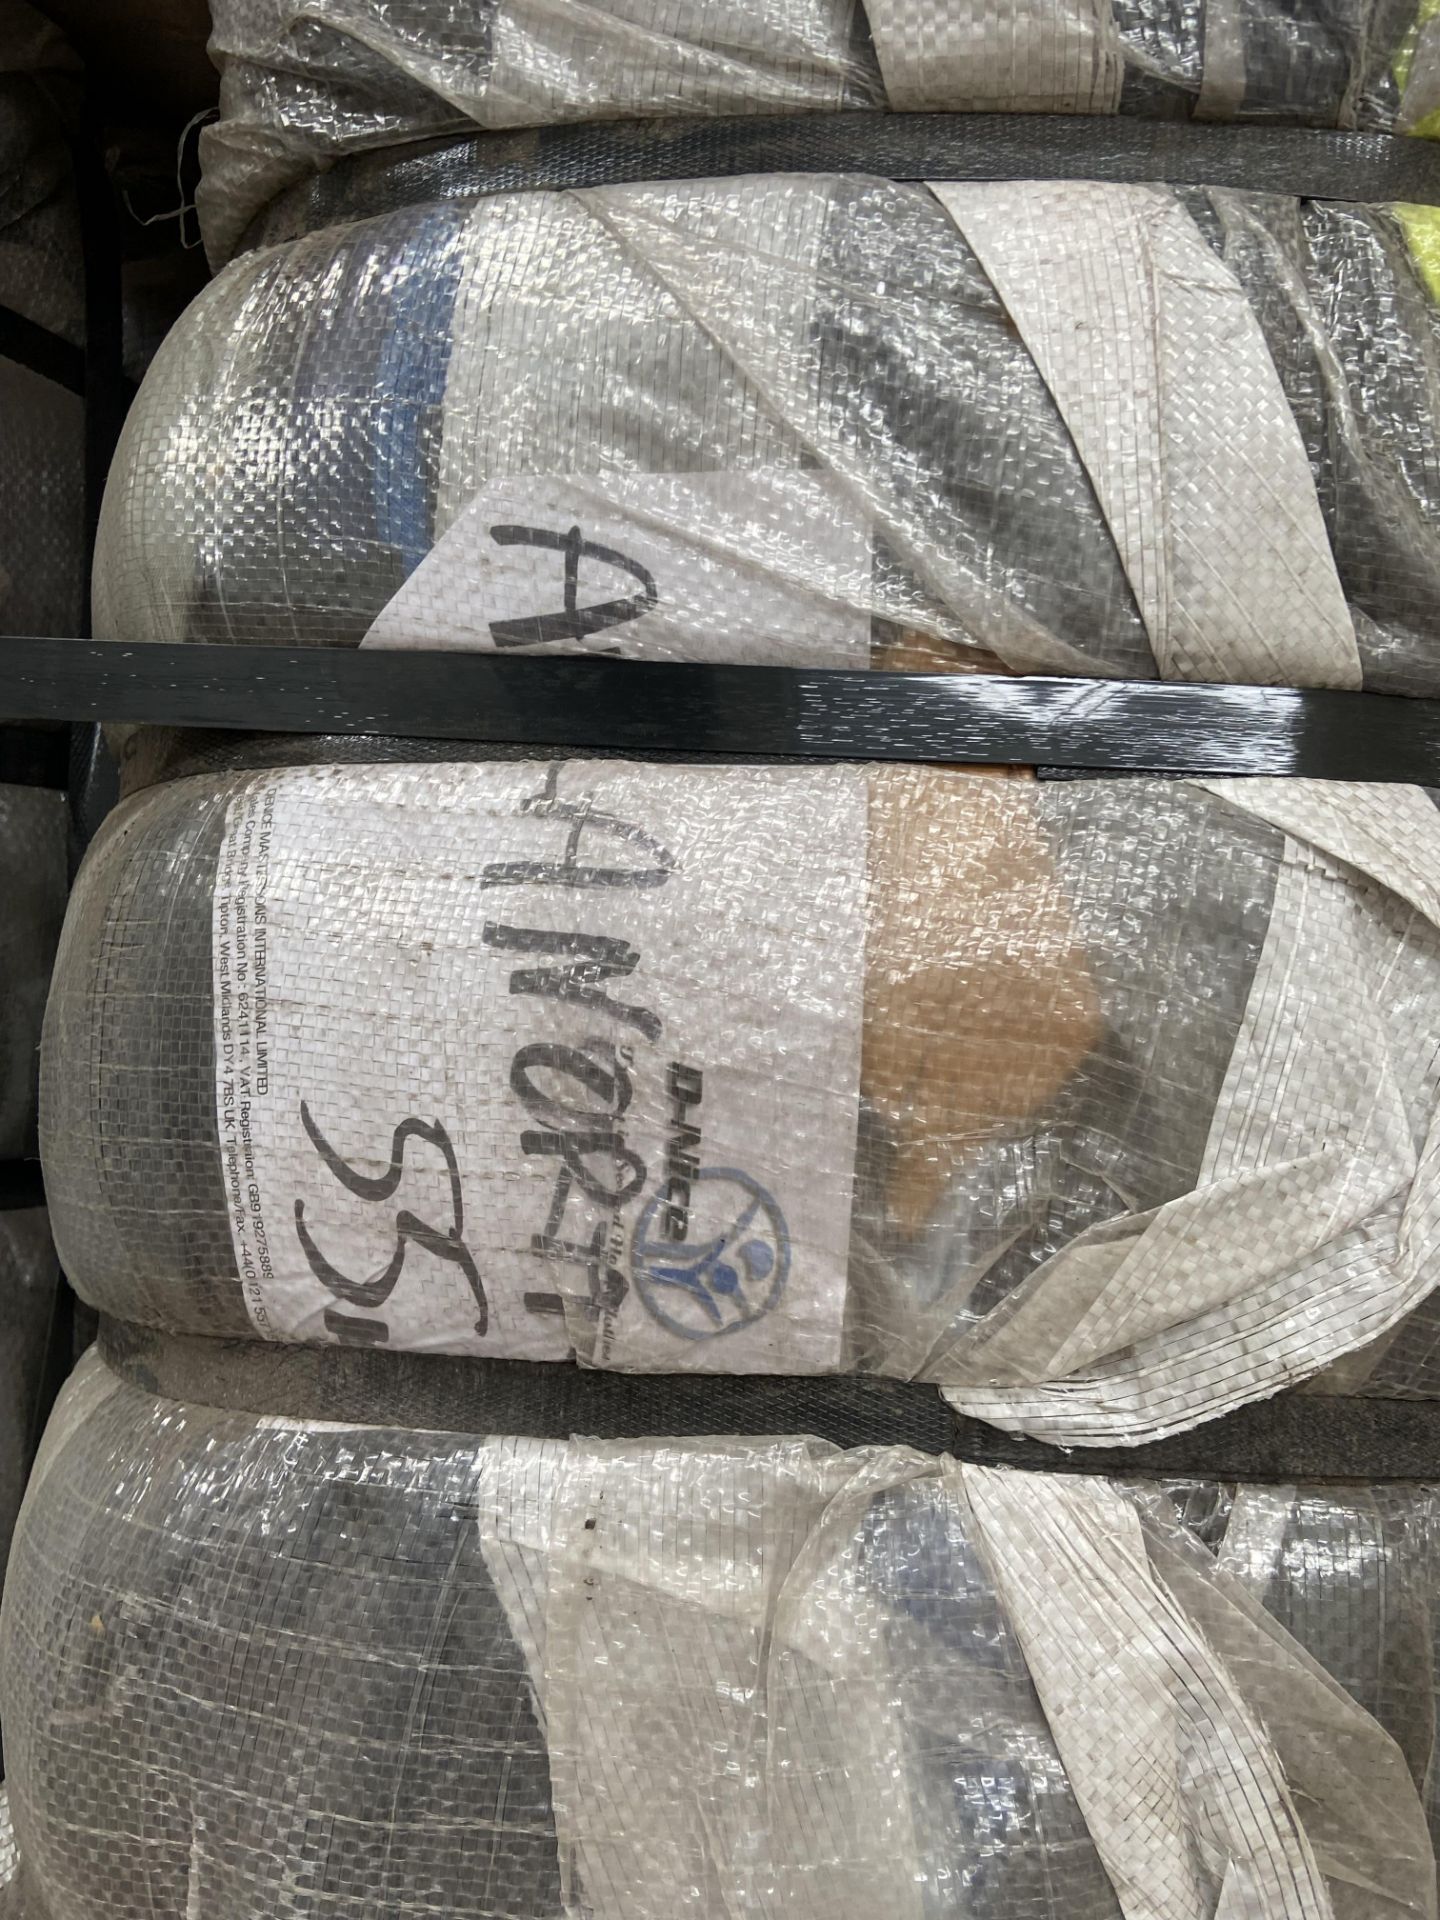 APPROX 208 BALES (9360KG) RECYCLABLE WASTE TEXTILES, Understood to comprise: Two bales x 45kg - Bild 5 aus 10